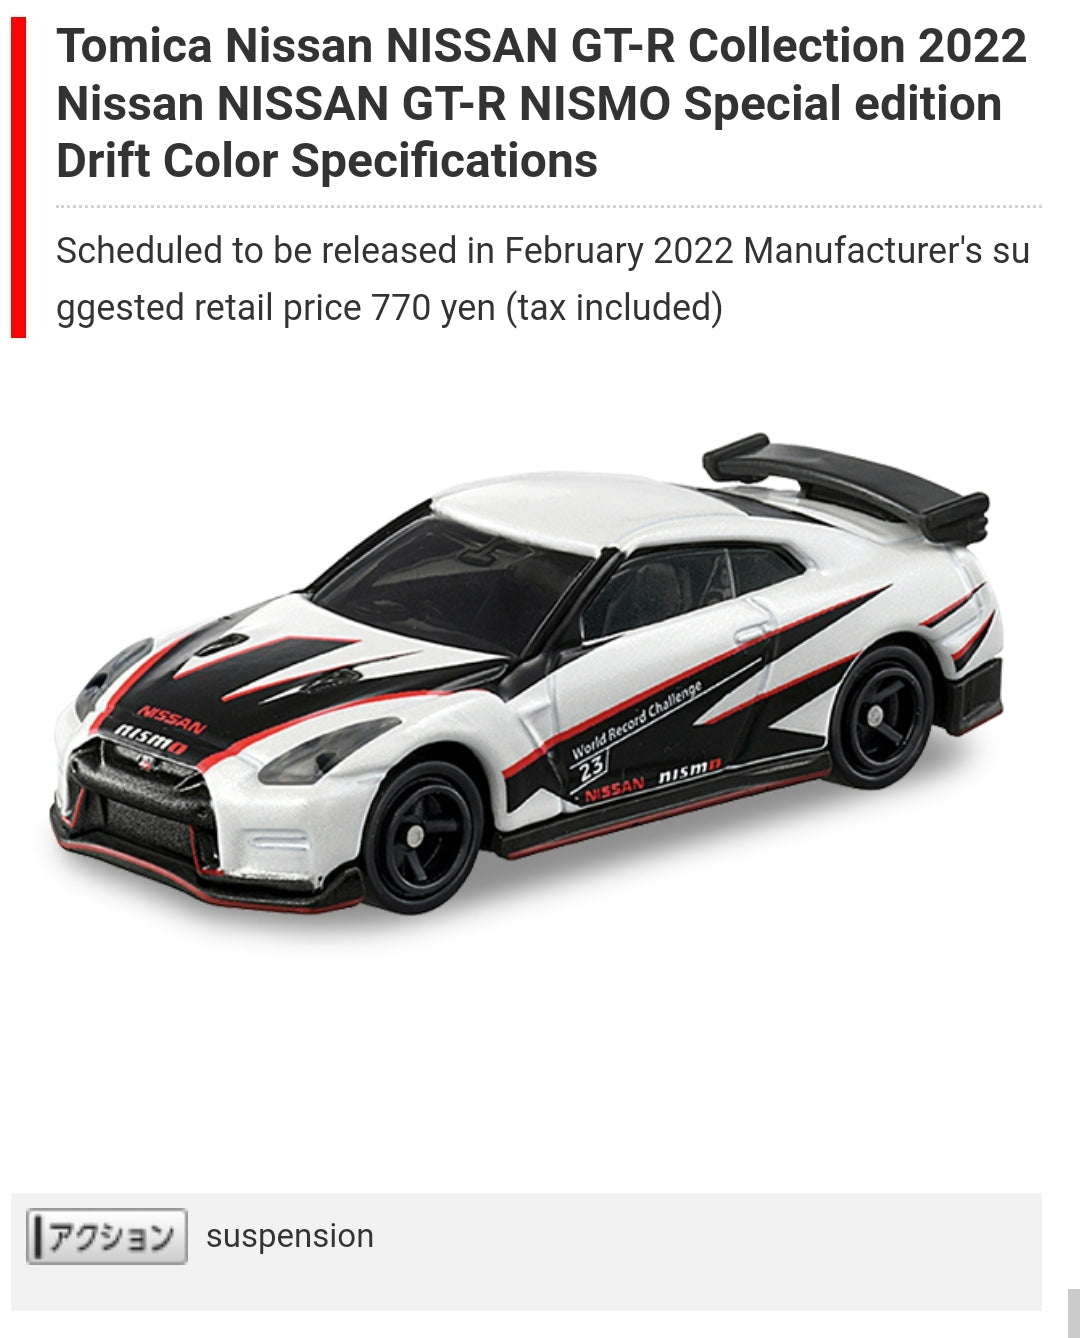 Tomica Nissan NISSAN GT-R Collection 2022
Nissan NISSAN GT-R NISMO Special edition Drift Color Specifications